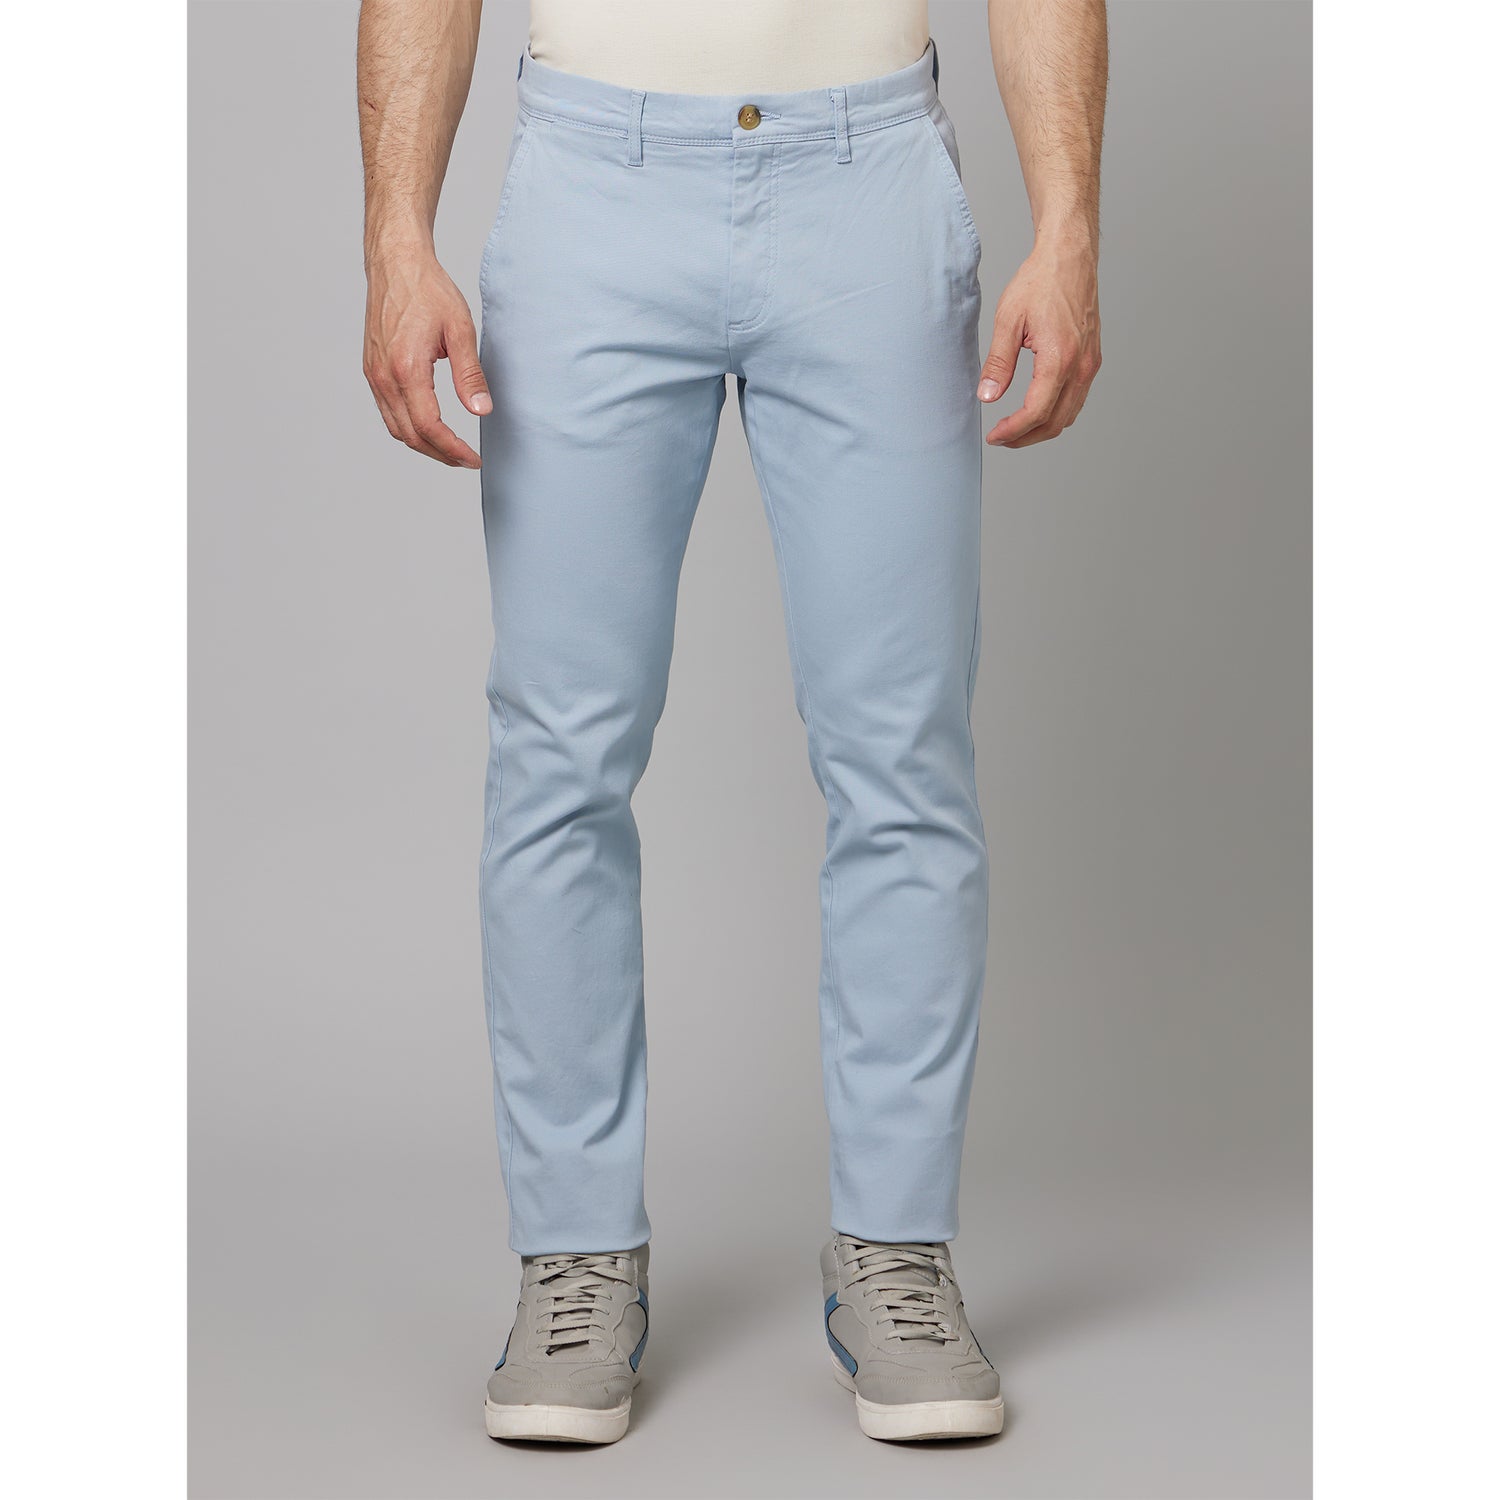 Light Blue Mid Rise Plain Cotton Slim Fit Chinos Trousers (TOCHARLES)